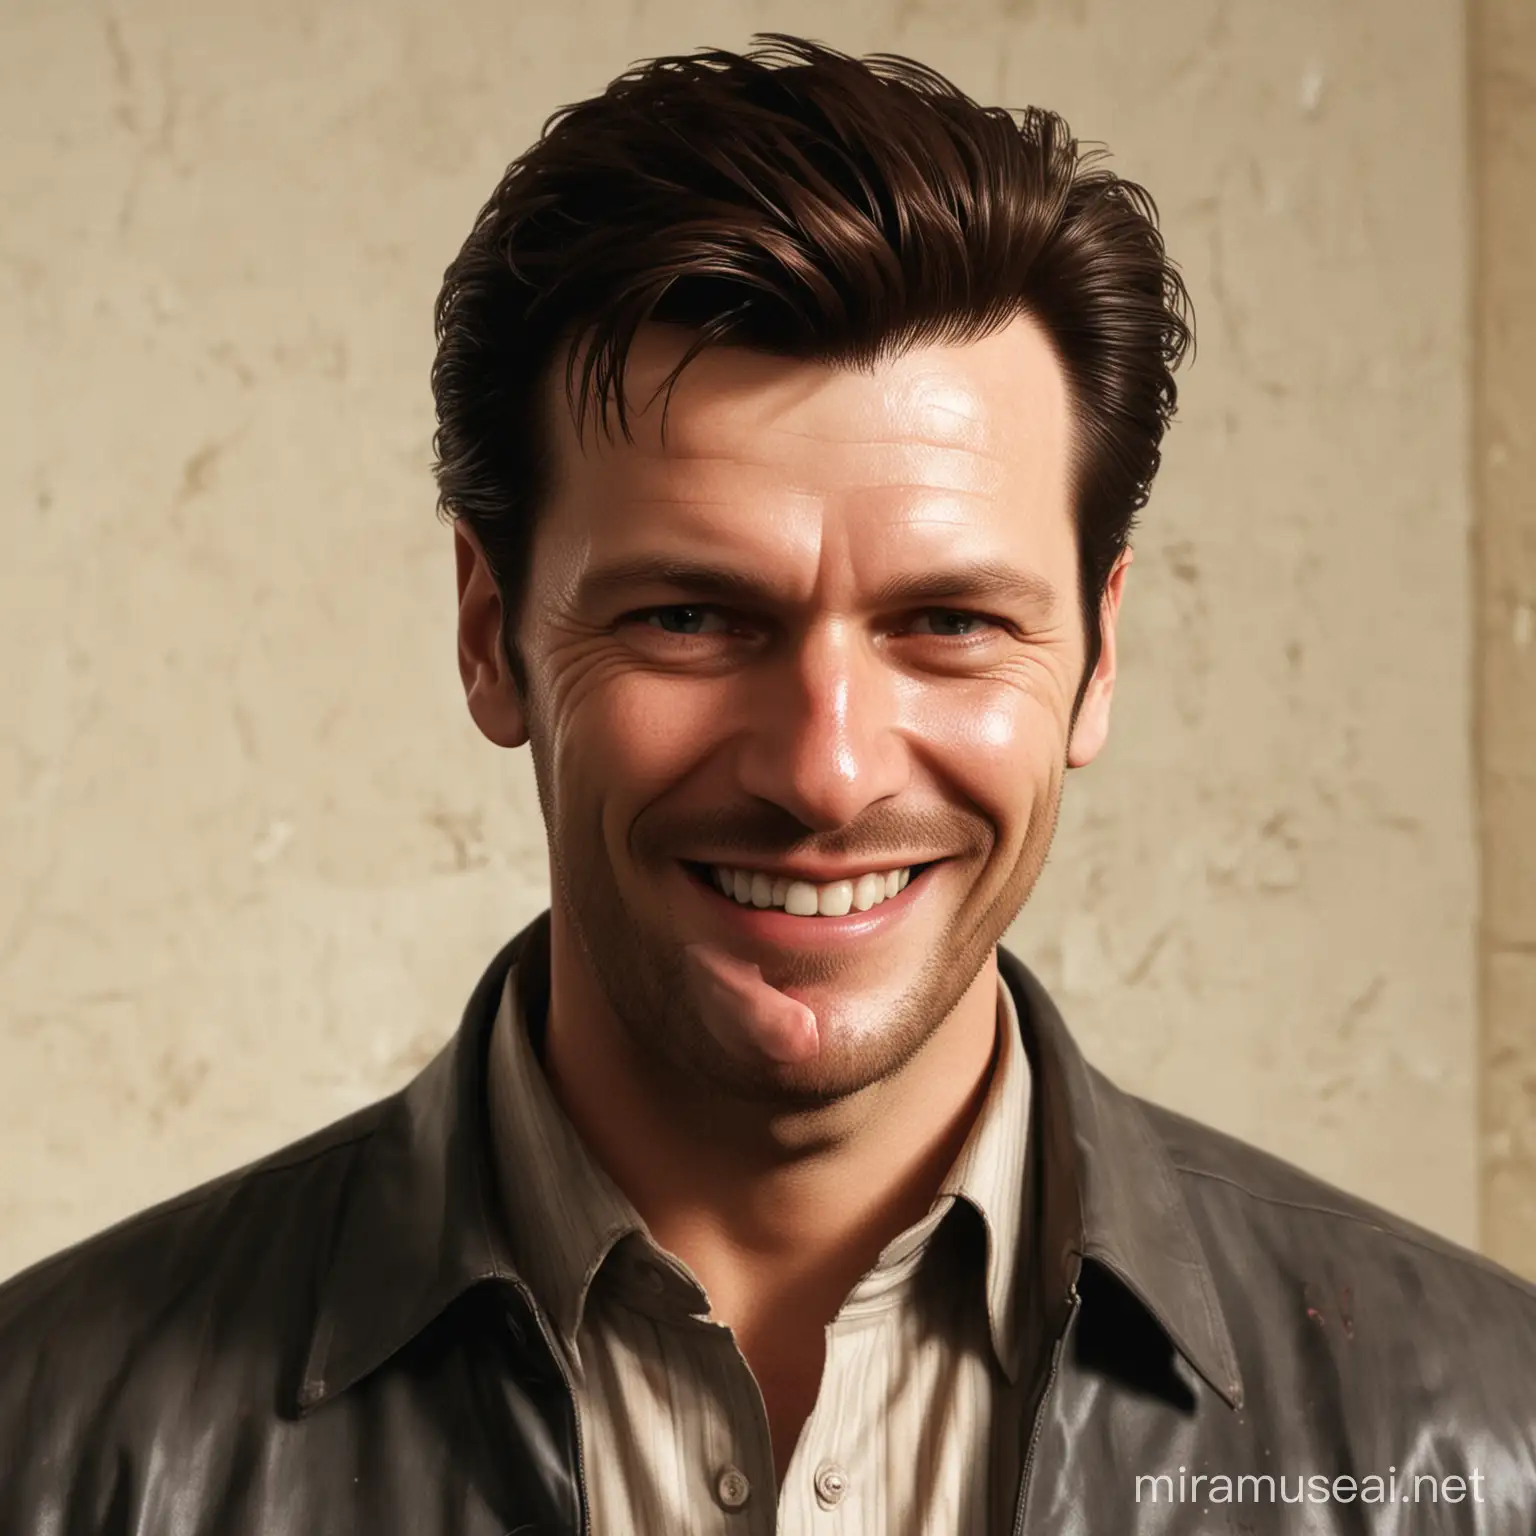 Max Payne smiling after having eaten red dye cavity detecting pills from the 80s